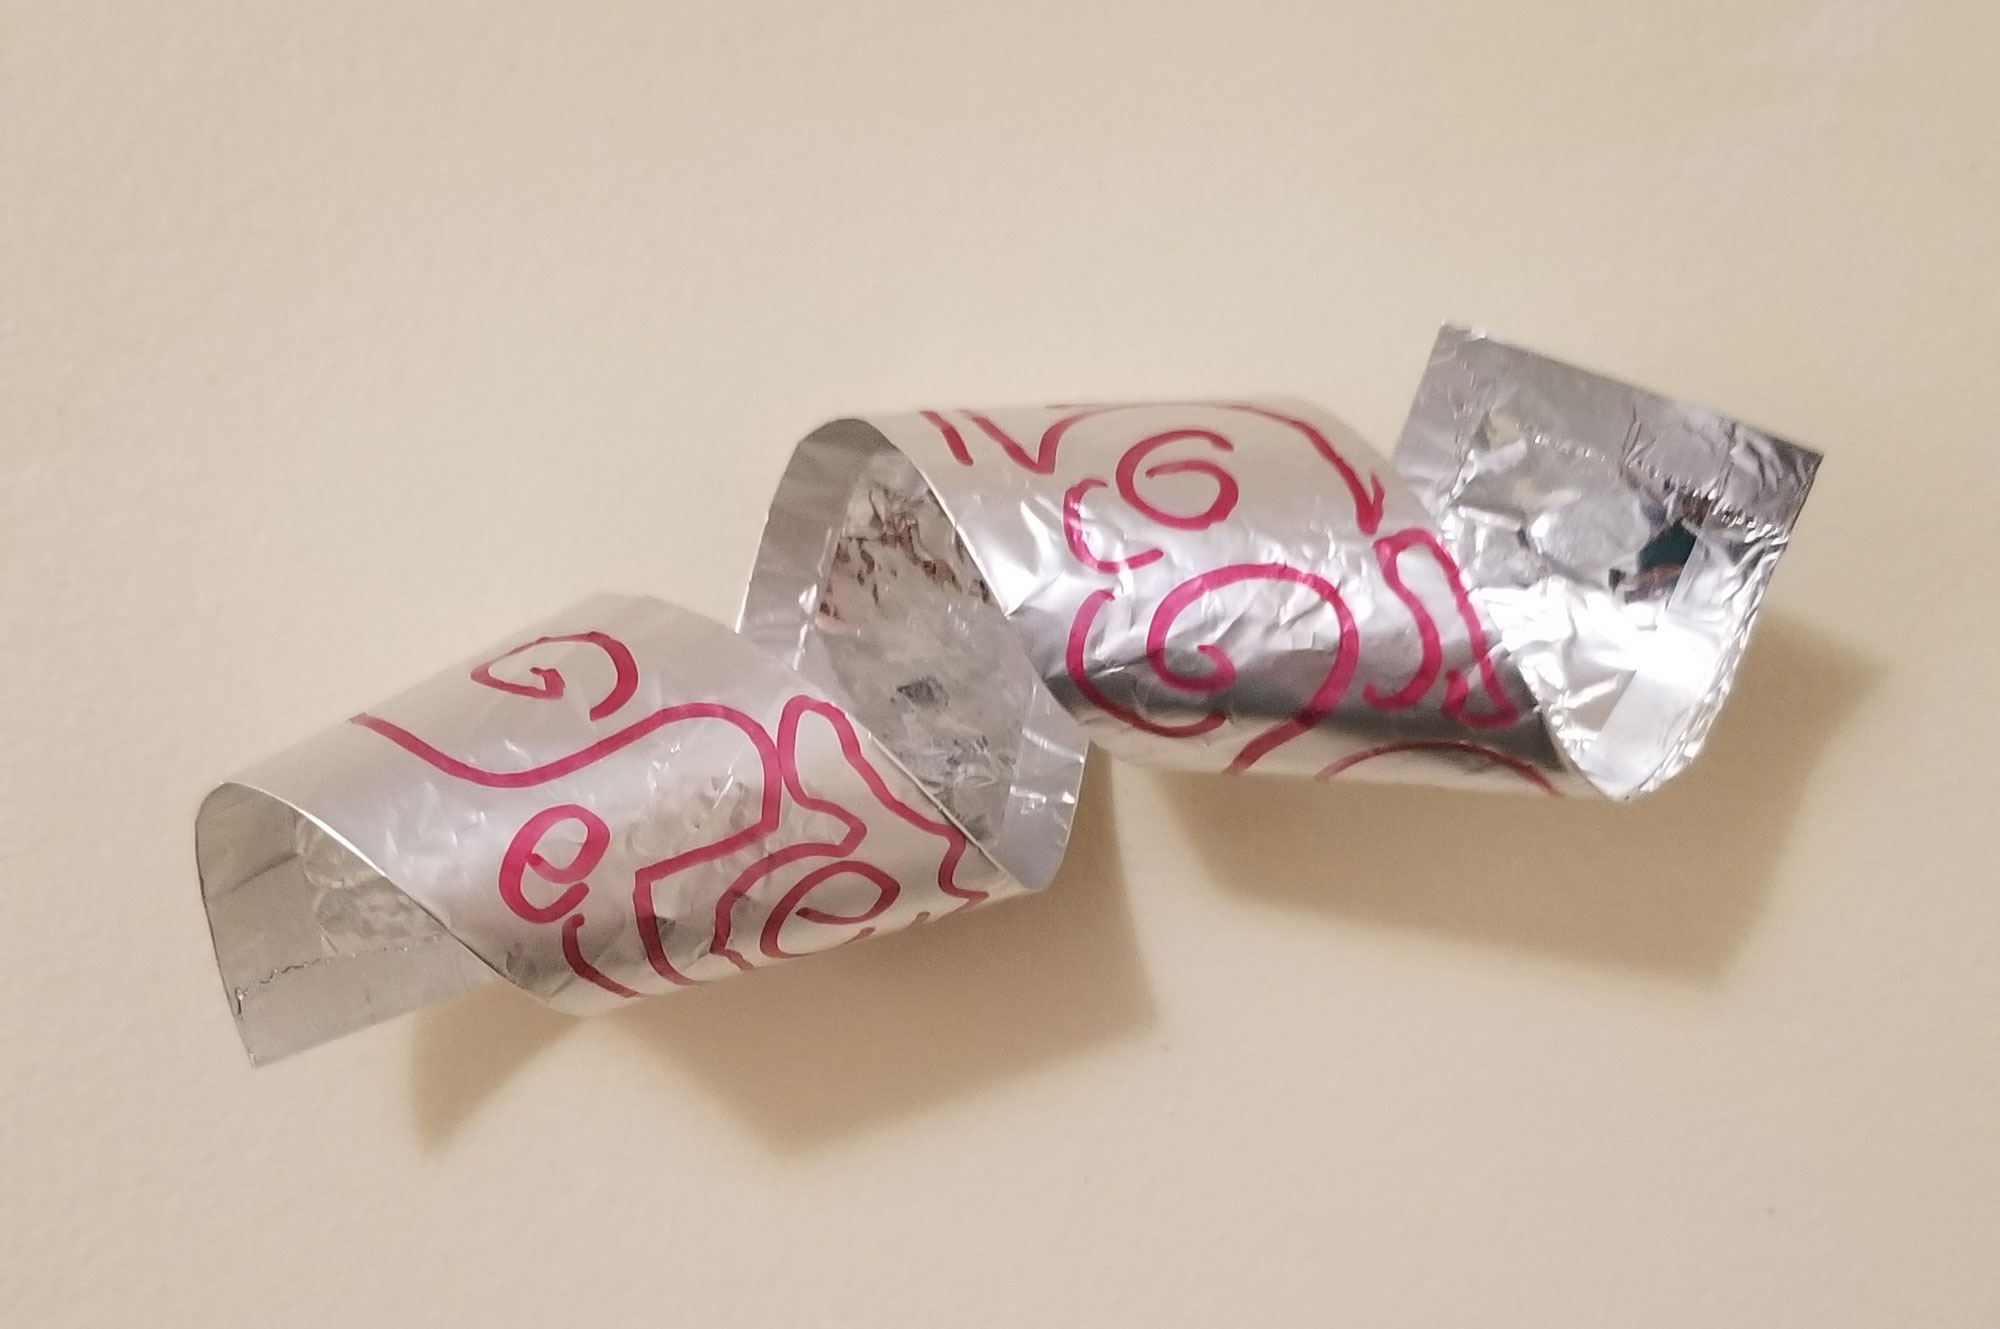 A coil of aluminum foil decorated as an art project for children.